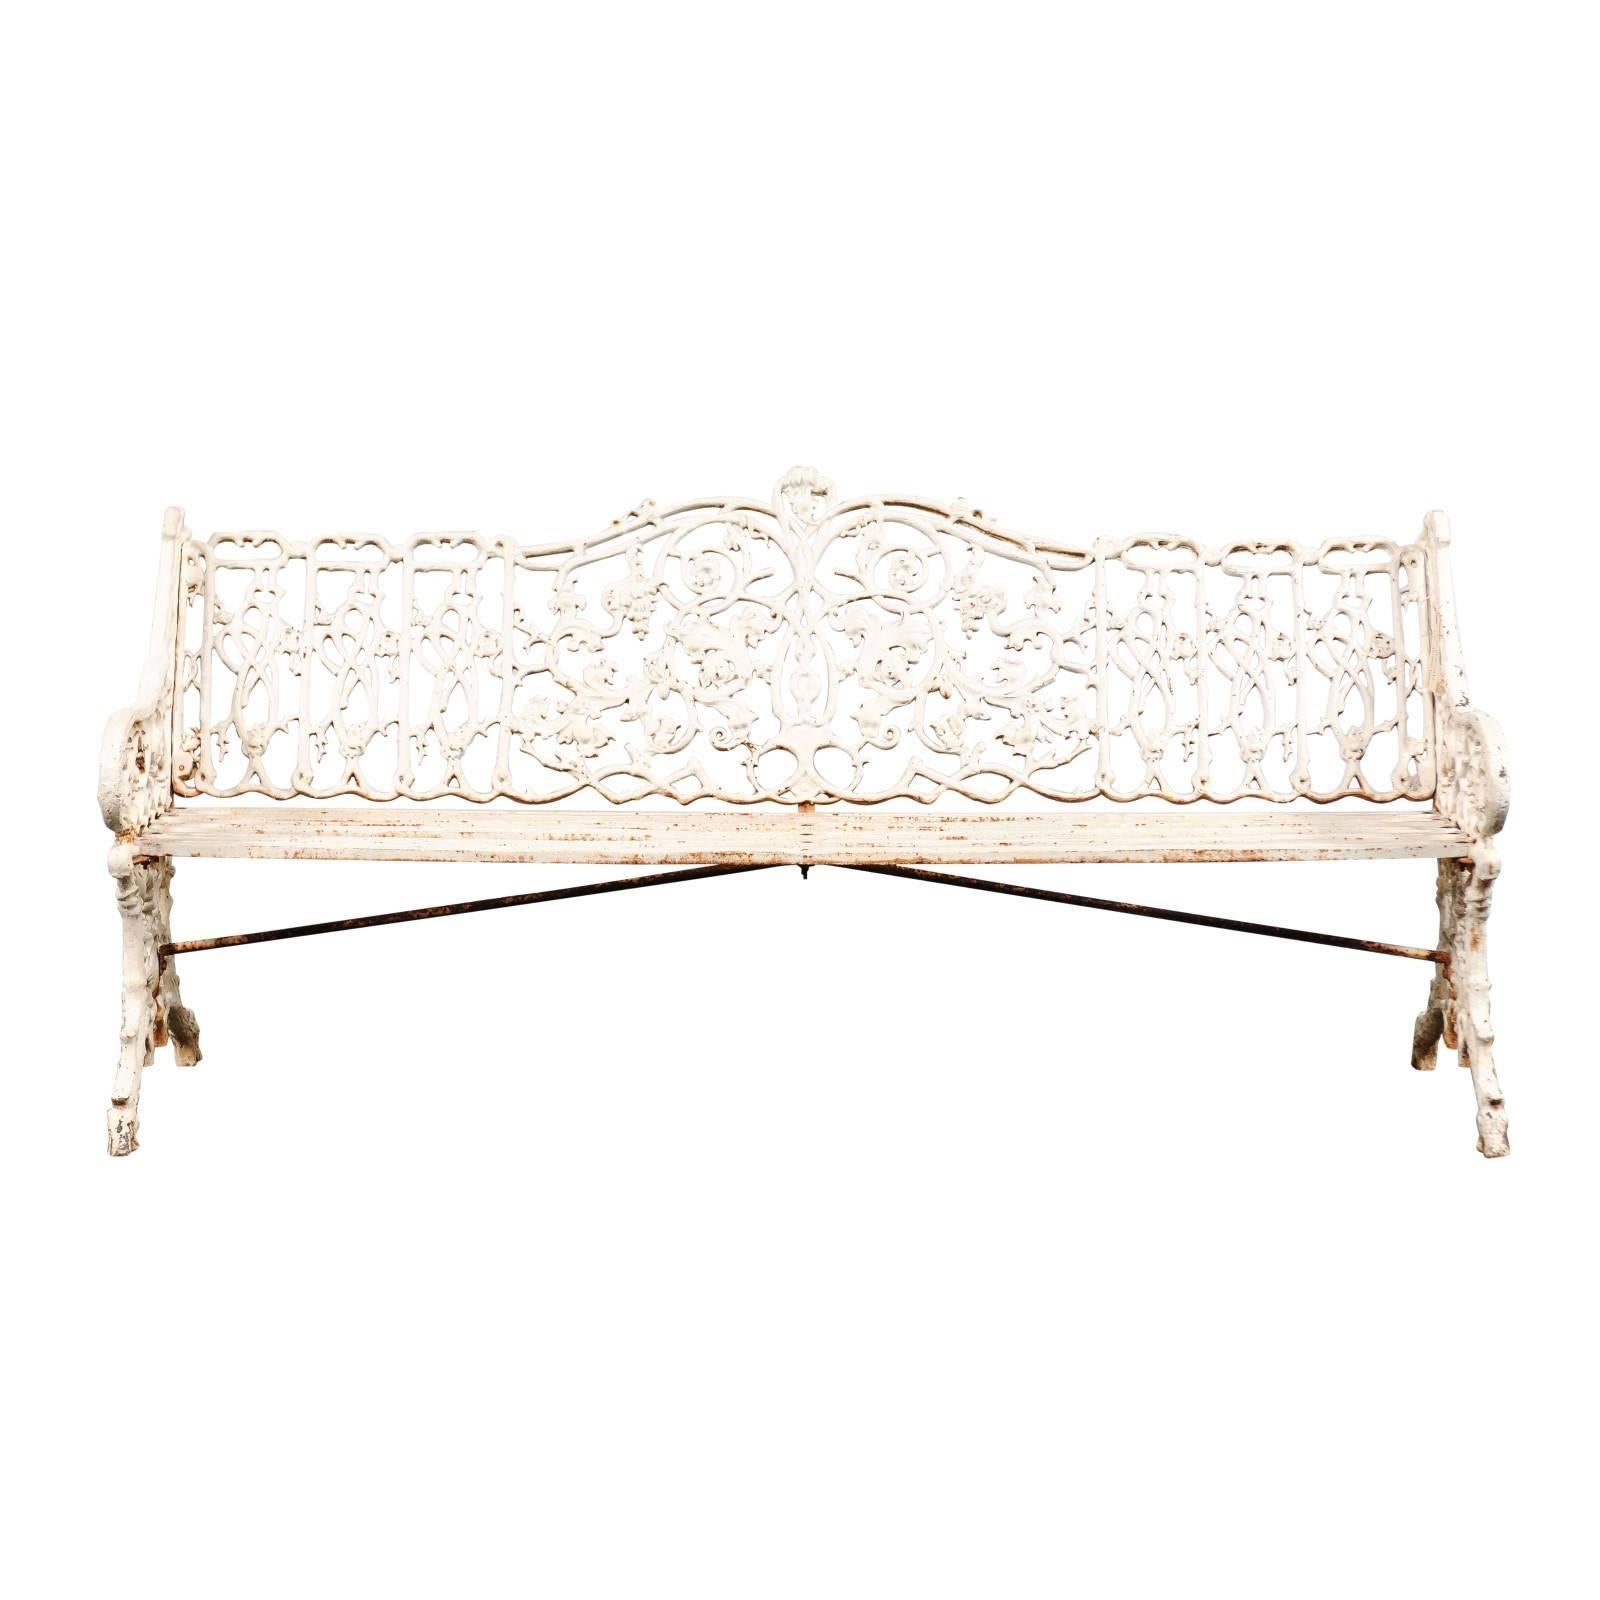 19th Century English Painted Iron Garden Bench, Old Surfaces